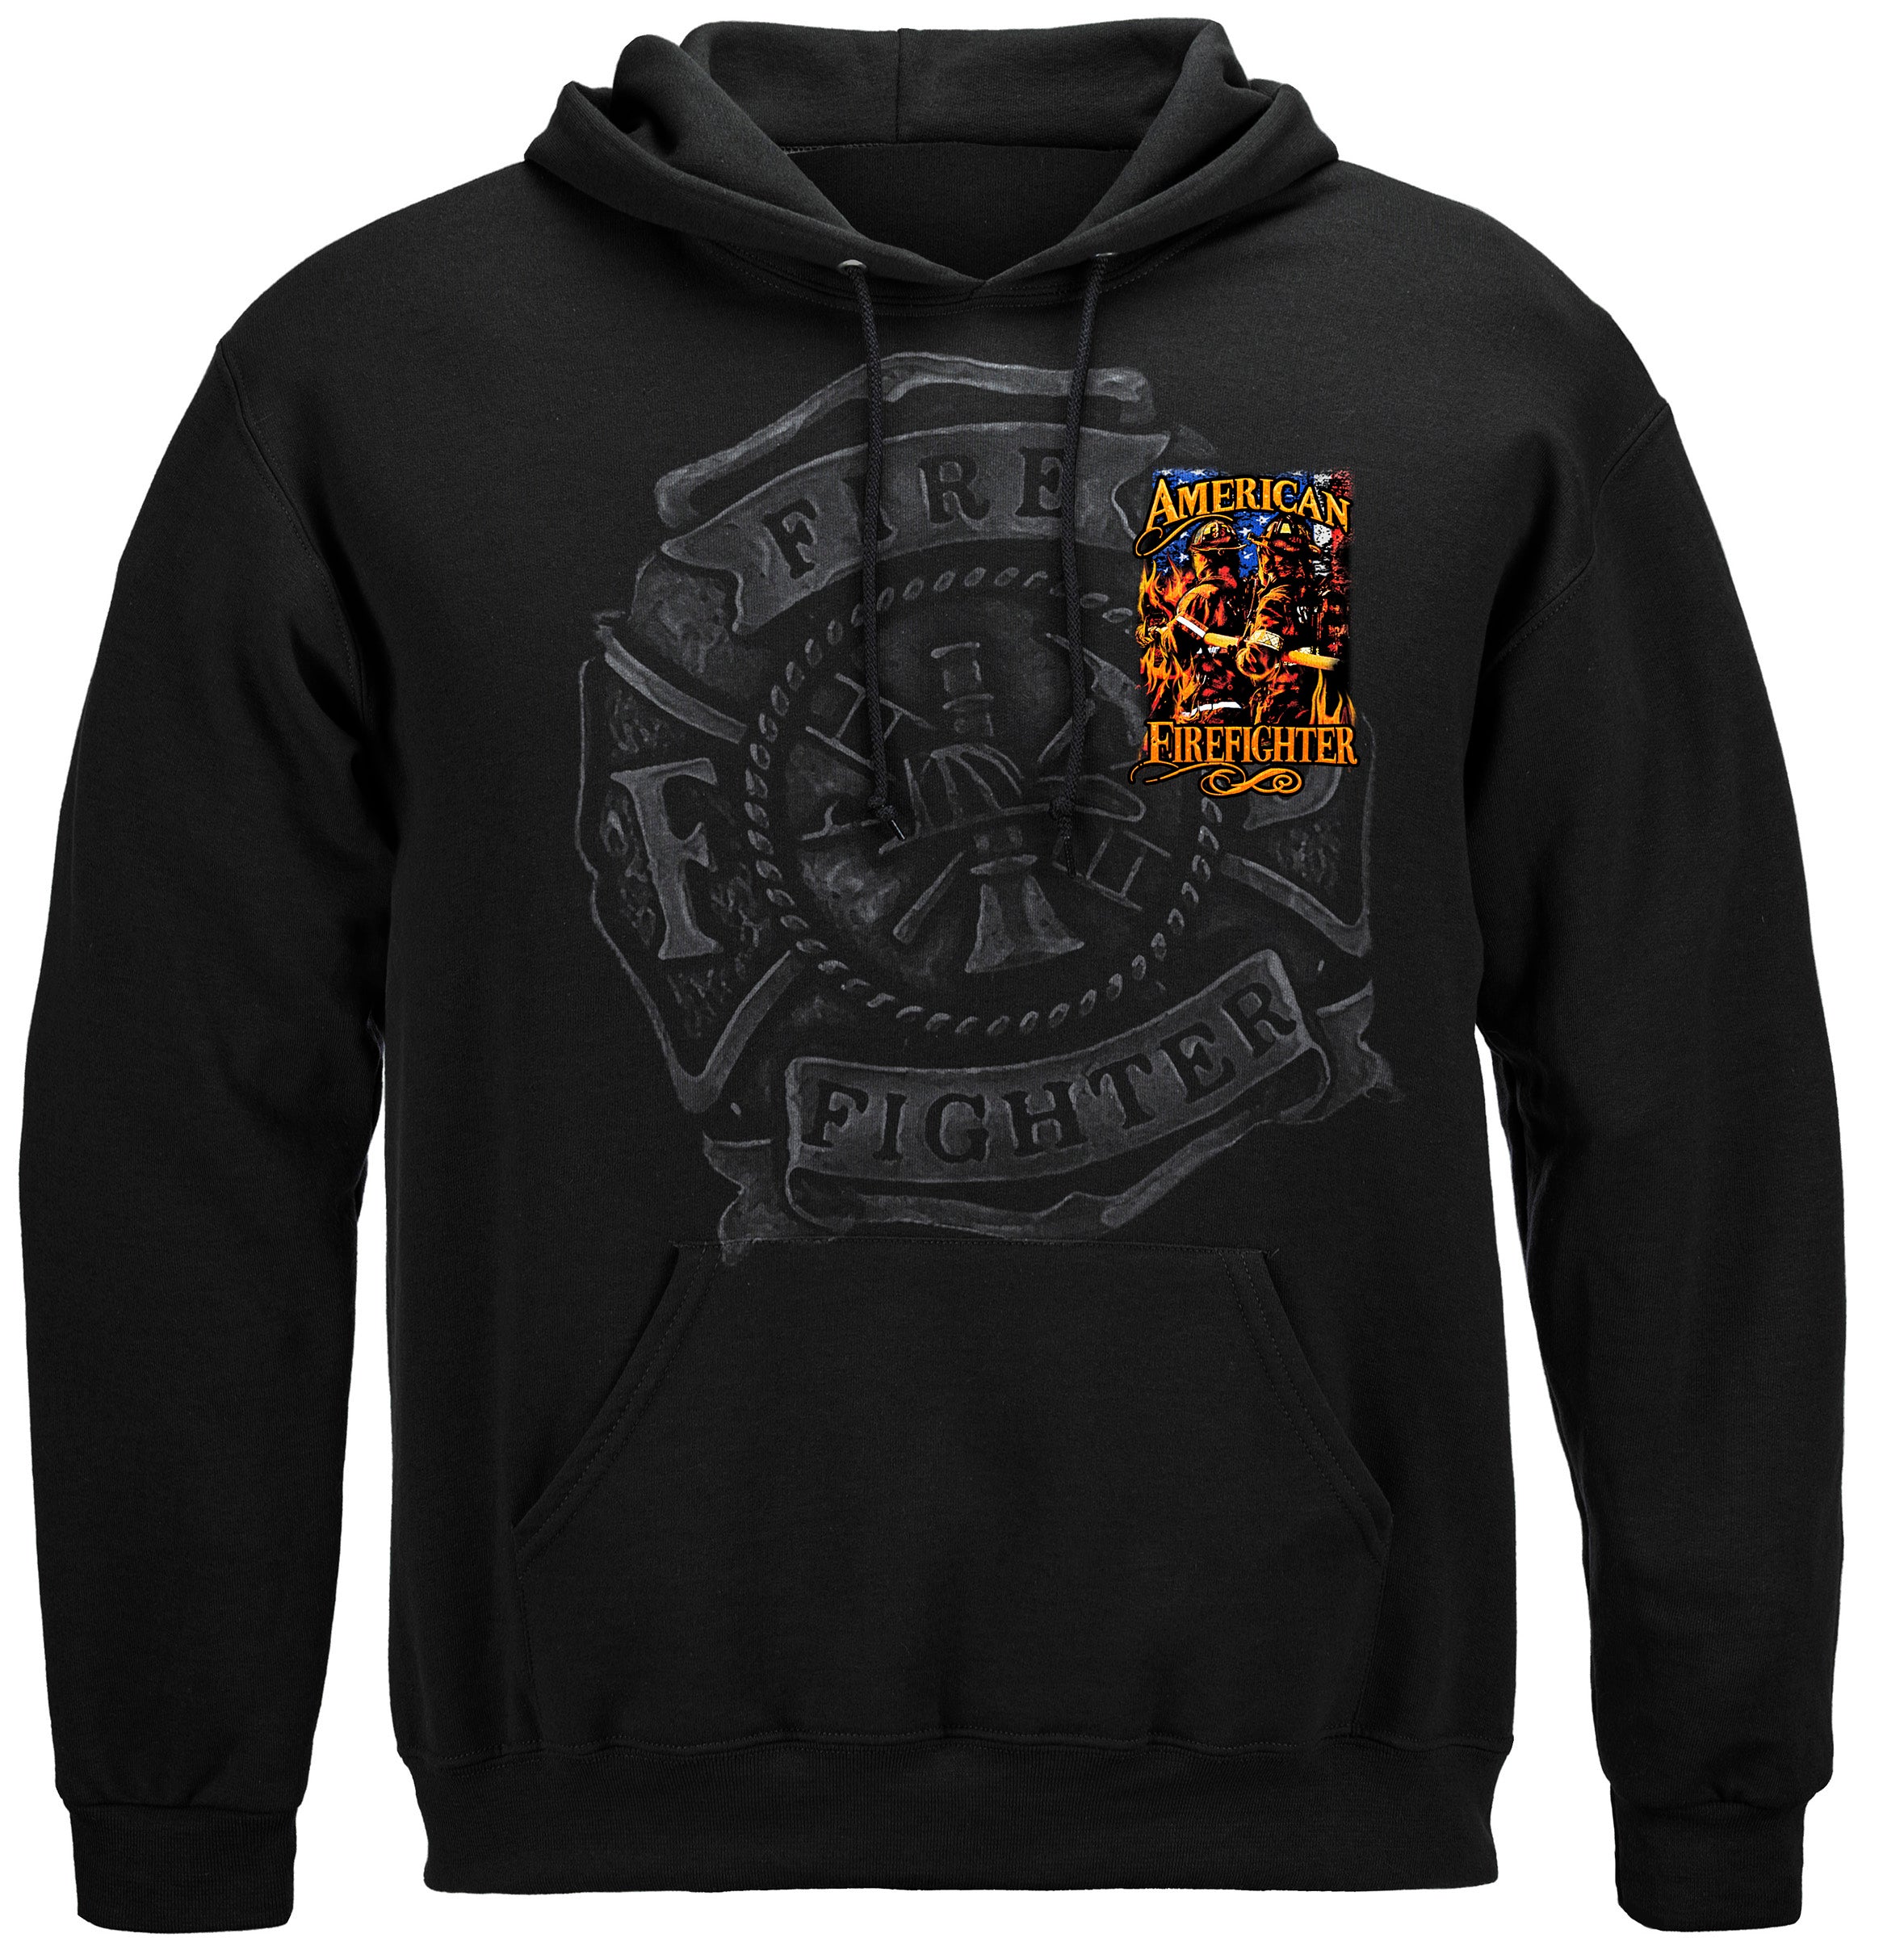 Image of Elite Breed American Firefighter Hooded Sweat Shirt